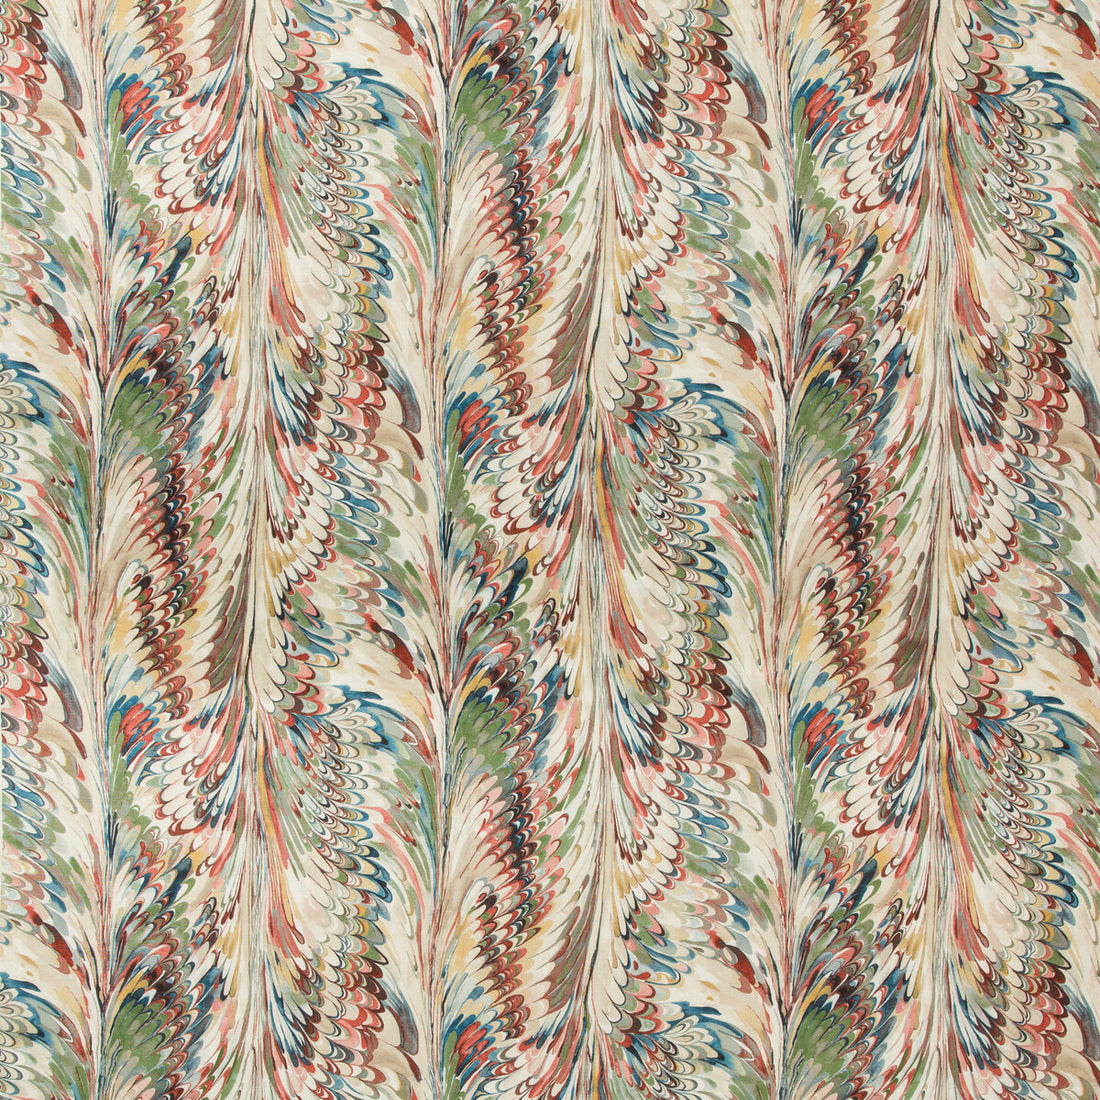 Taplow Print fabric in spice/leaf color - pattern 2019114.139.0 - by Lee Jofa in the Manor House collection